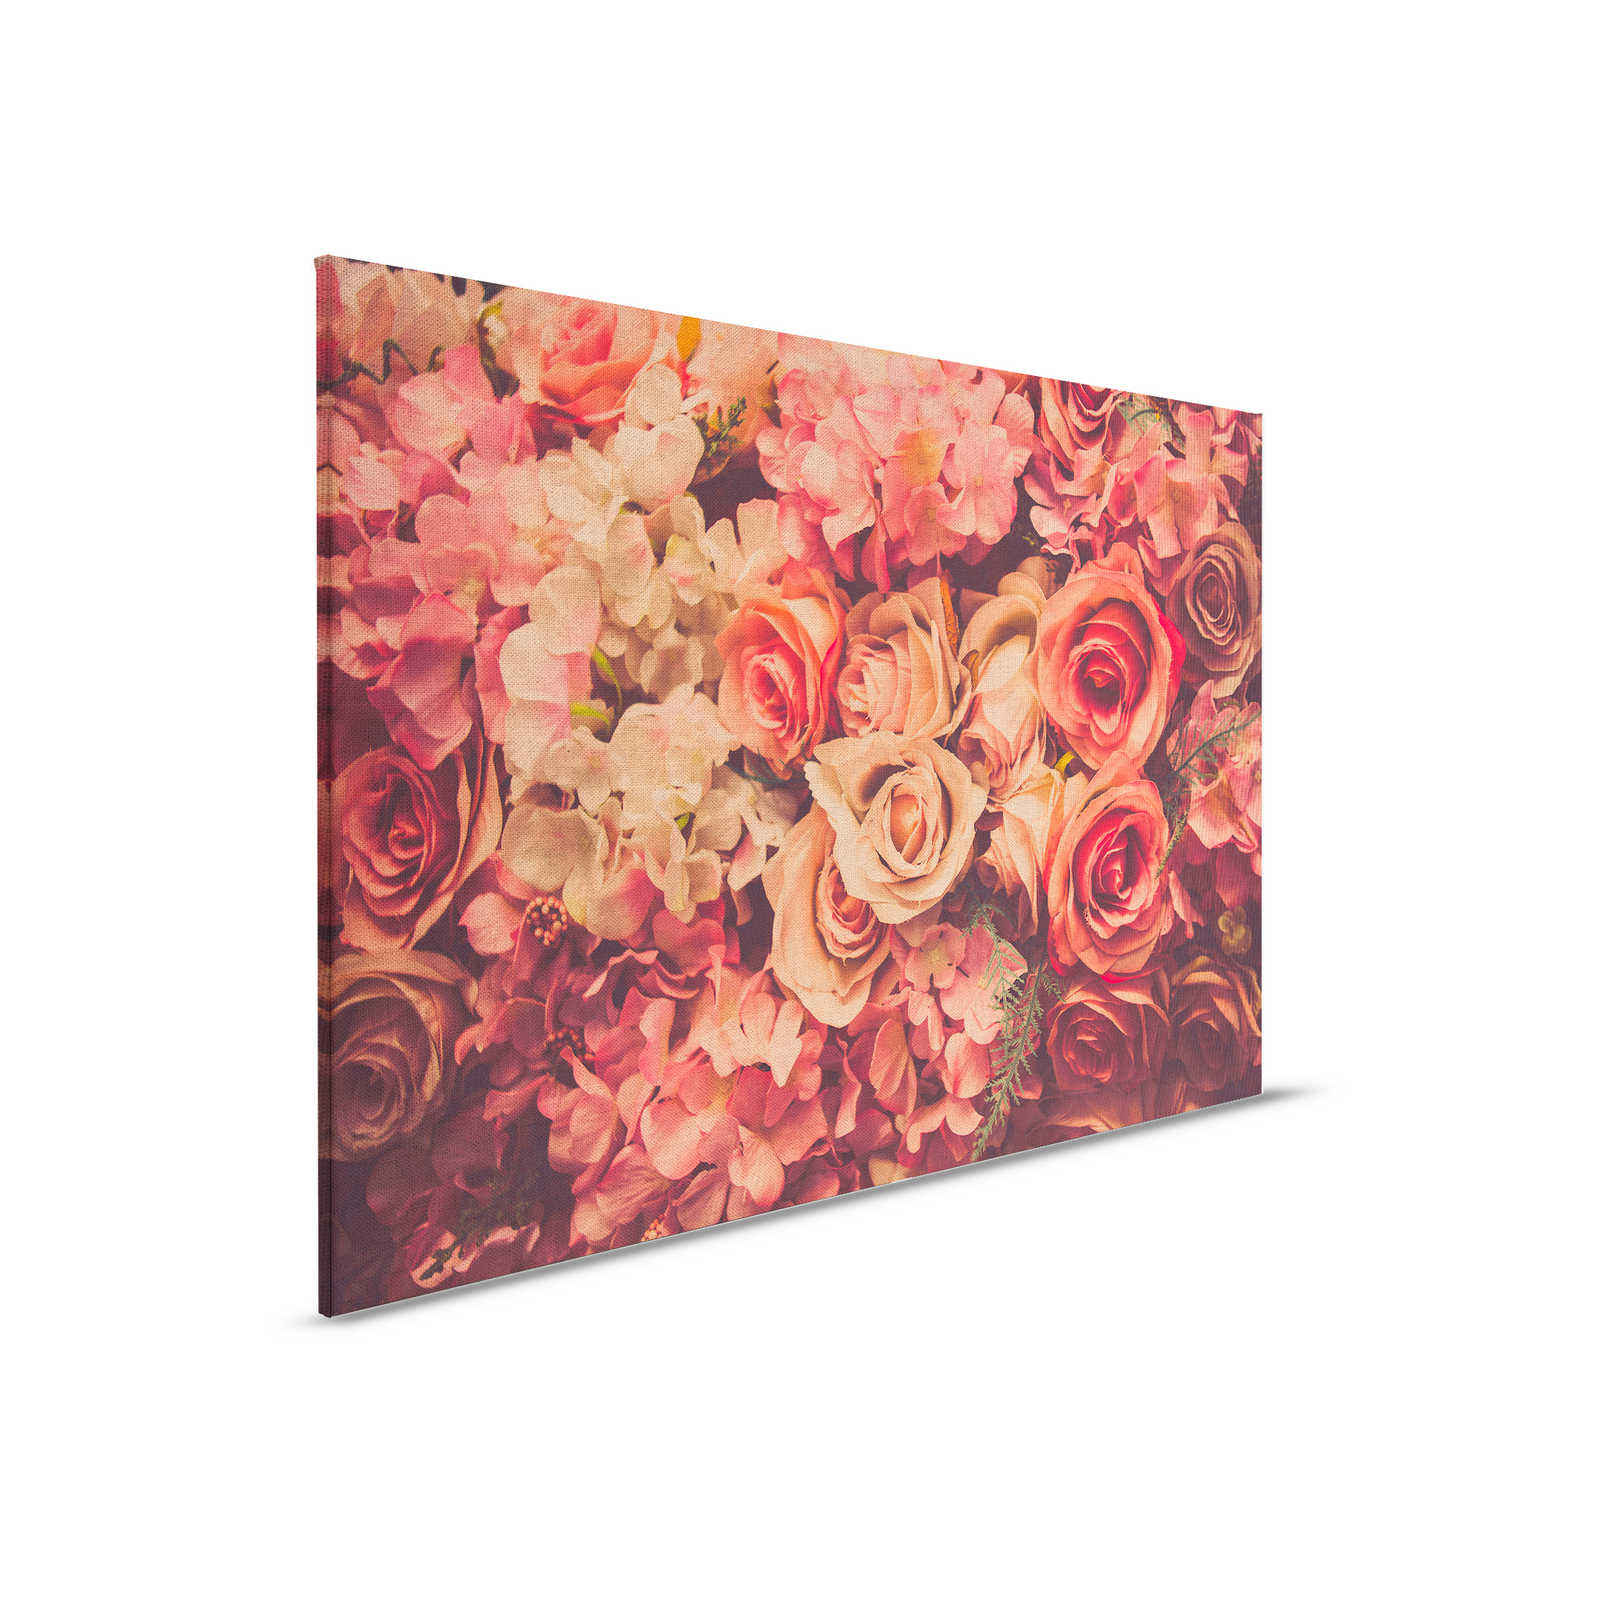         Canvas with romantic rose motif in linen look - 0.90 m x 0.60 m
    